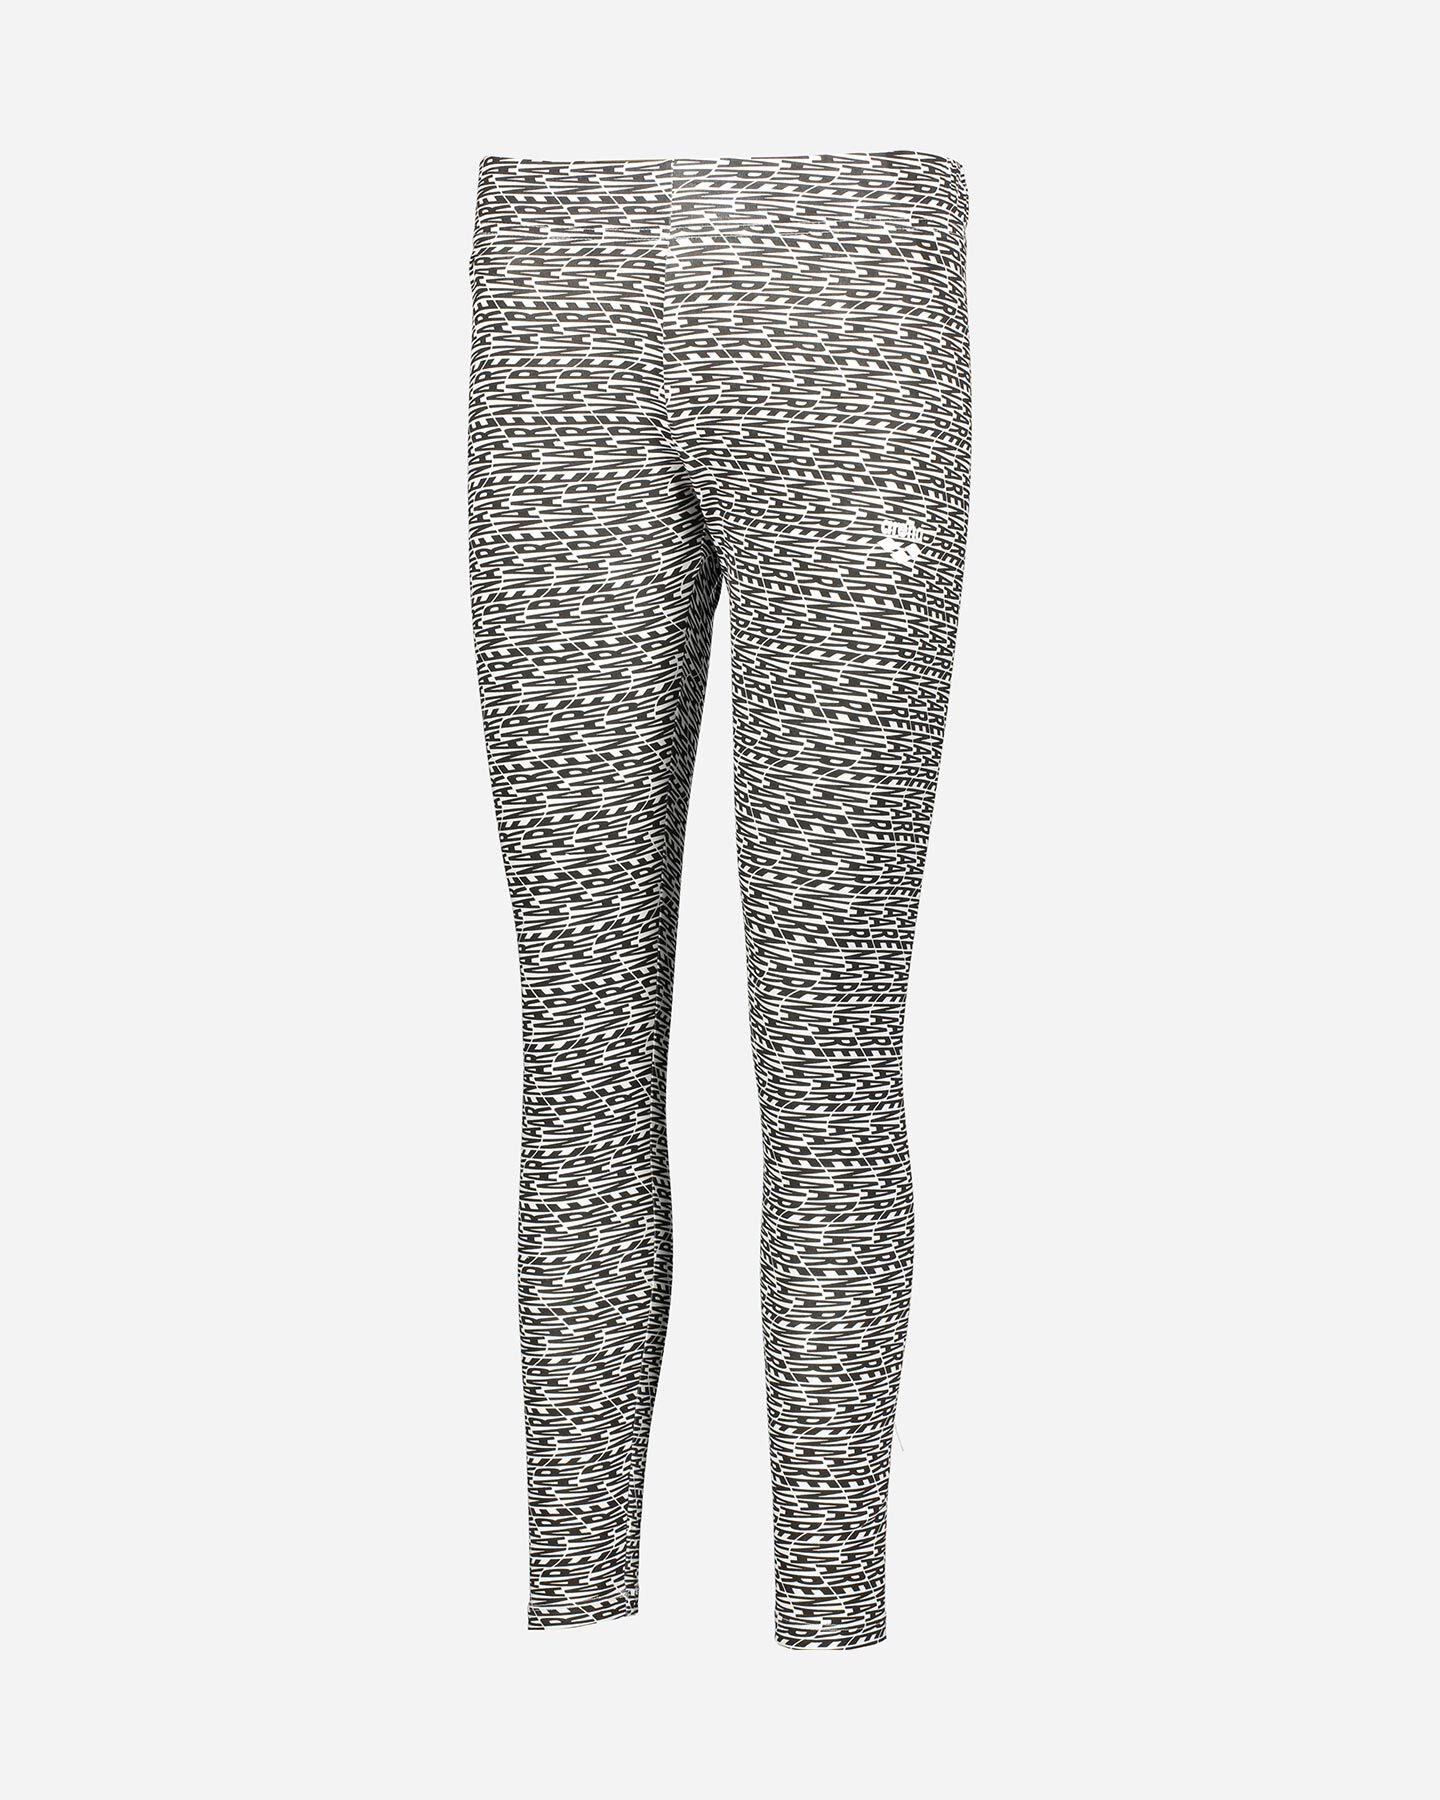  Leggings ARENA JSTRETCH AOP W S4087513|001/AOP|XS scatto 4